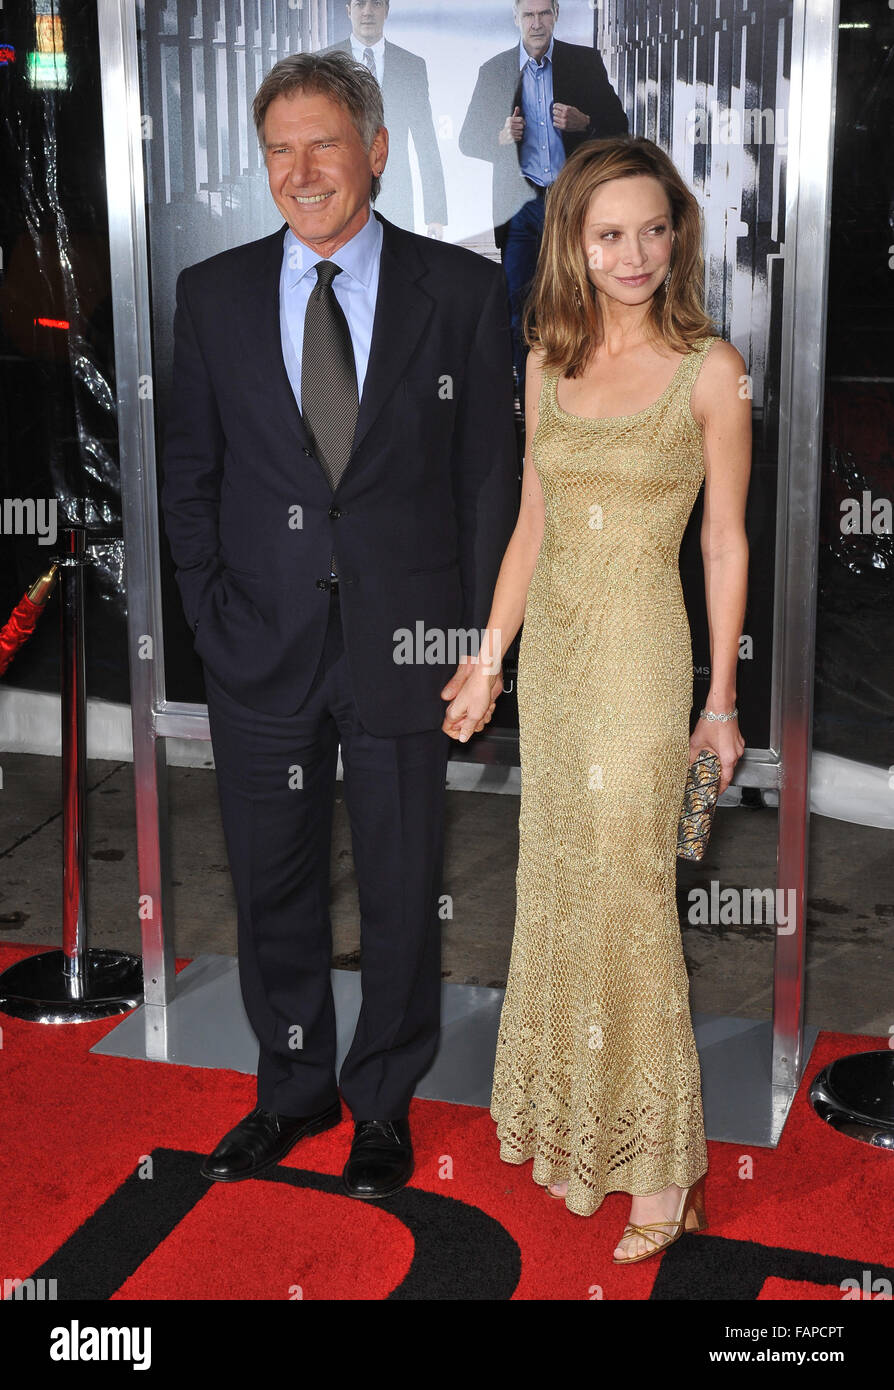 LOS ANGELES, CA - JANUARY 19, 2010: Harrison Ford & Calista Flockhart at the premiere of his new movie 'Extraordinary Measures' at Grauman's Chinese Theatre, Hollywood. Stock Photo